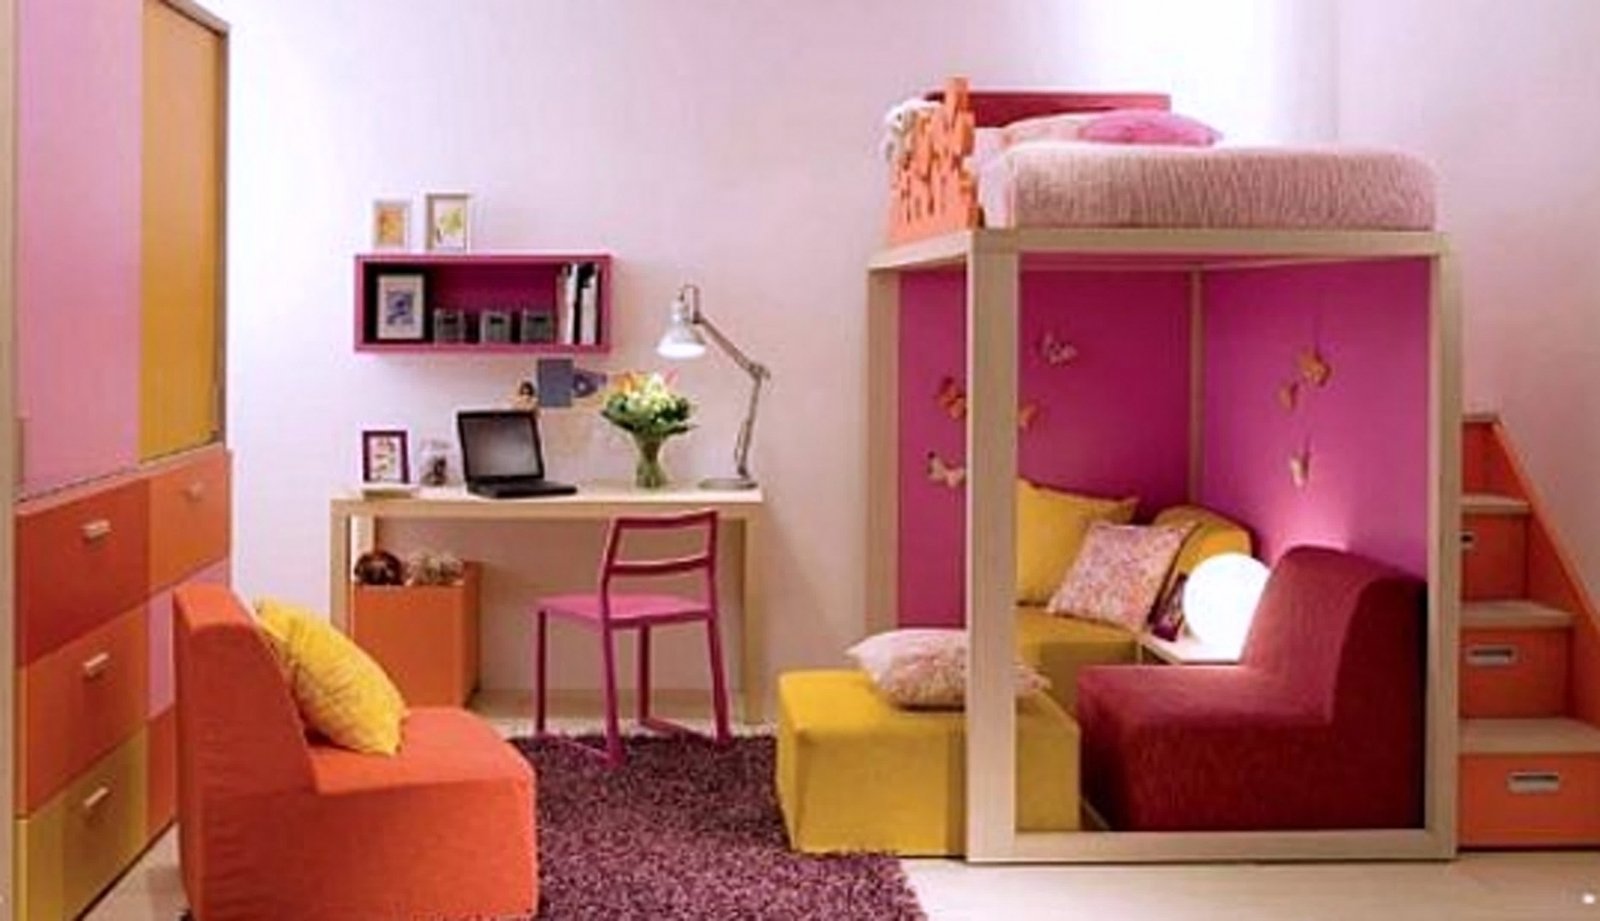 10 Most Recommended Small Bedroom Ideas For Teenage Girls girls small bedroom ideas for designs alluring decor ead teen 2023